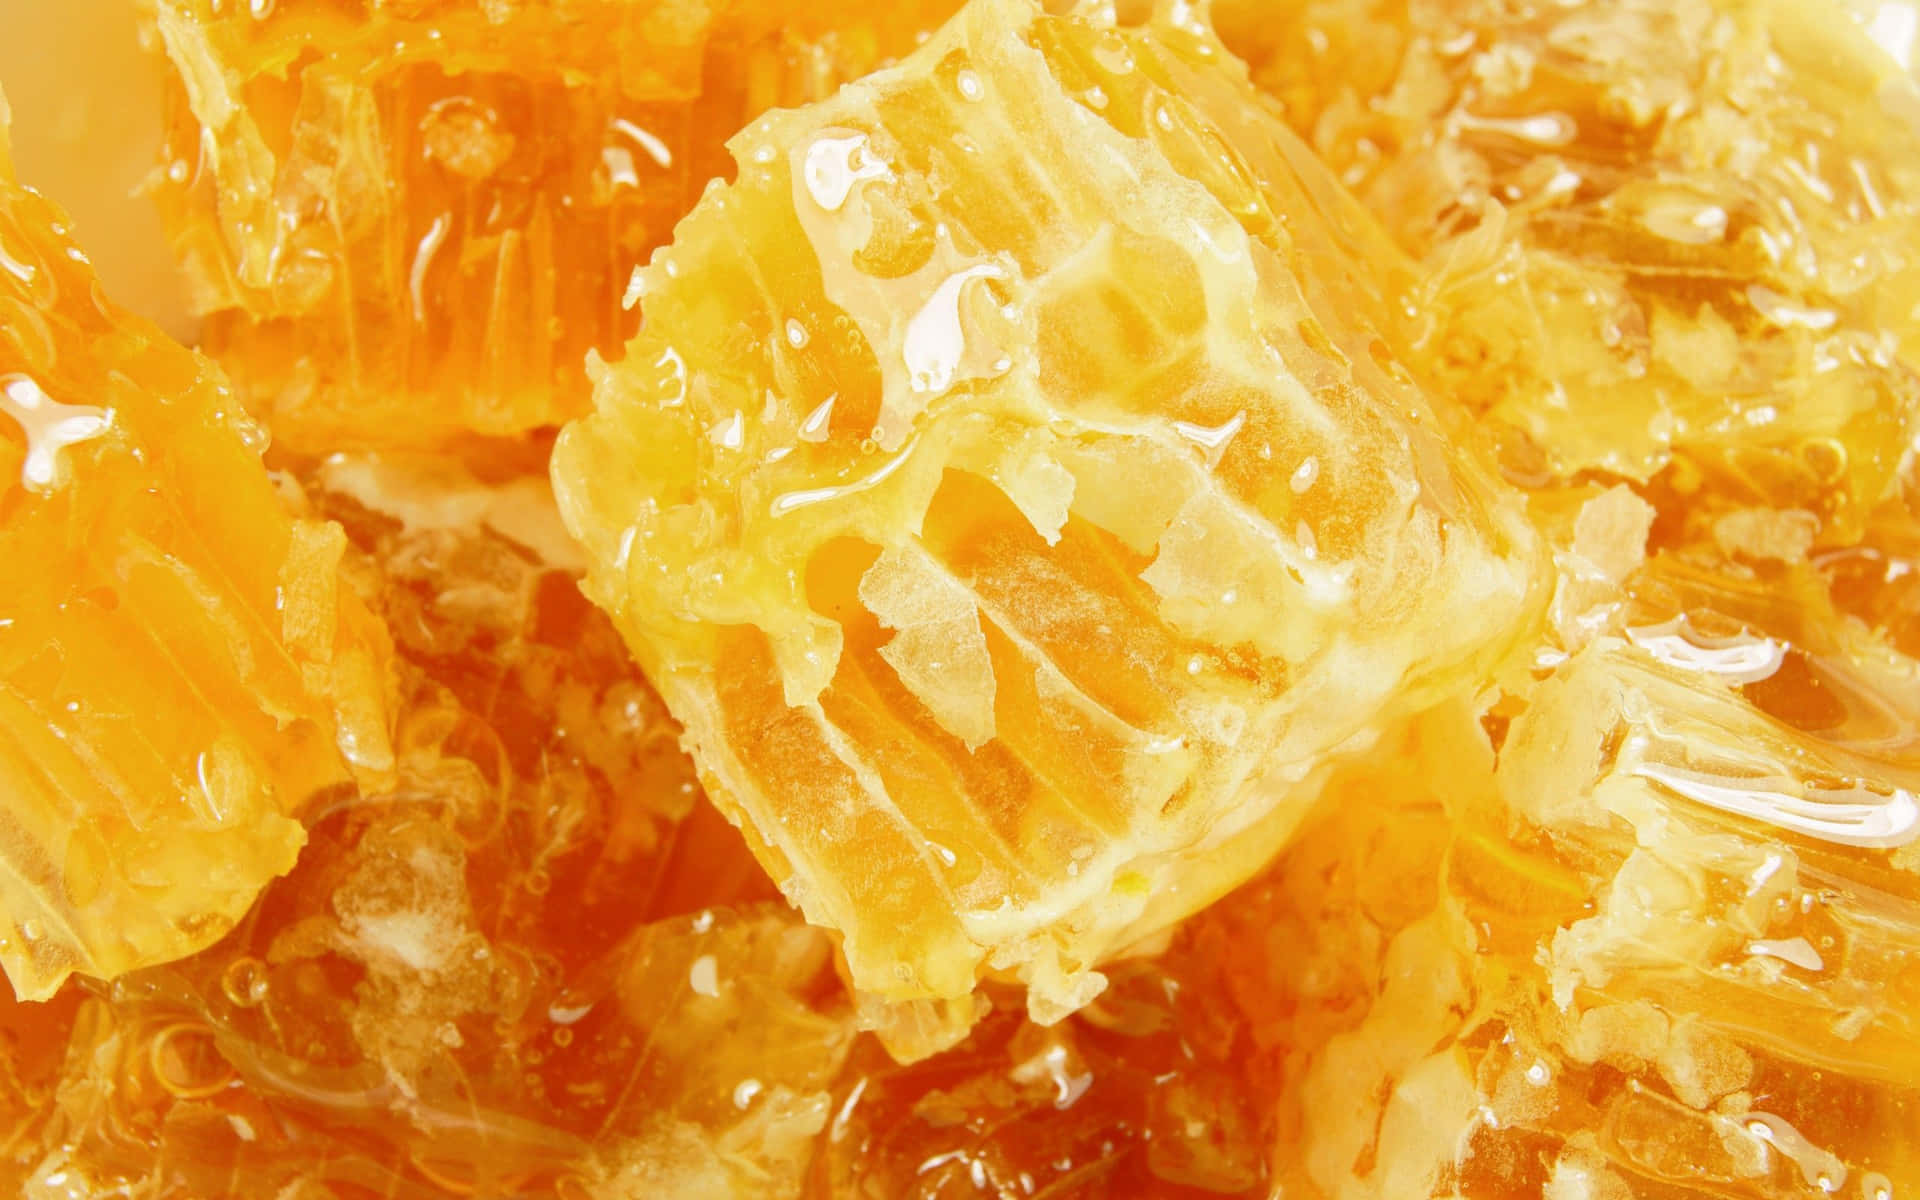 Honey Is A Natural Sweetener That Is Used In Many Foods